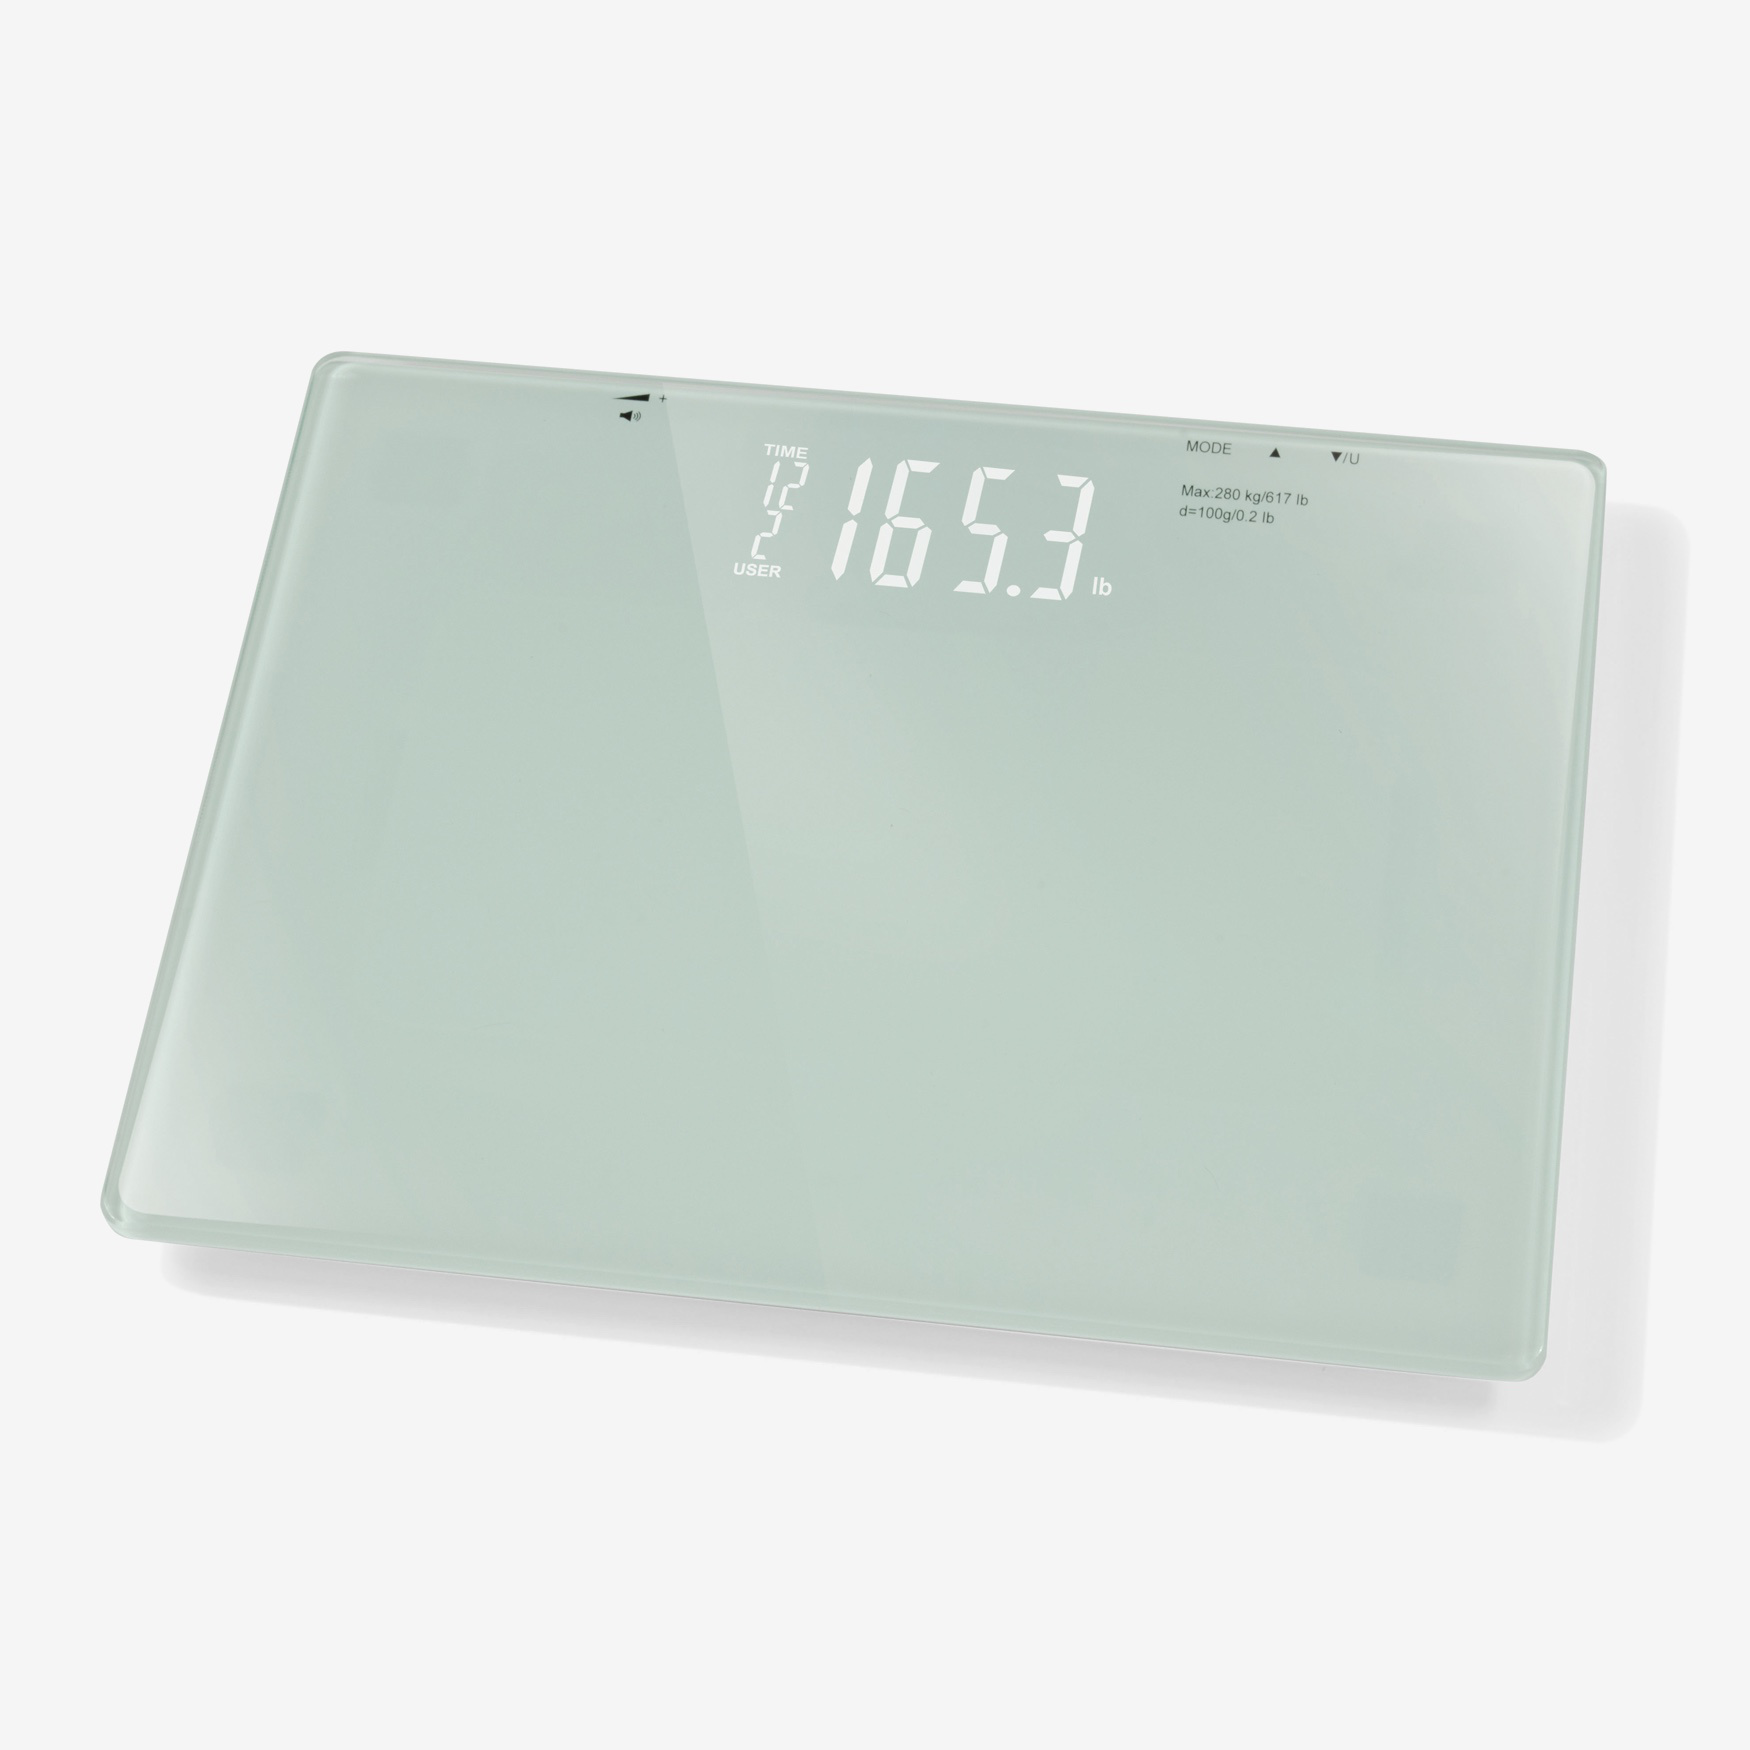 Deluxe Talking Scale, WHITE